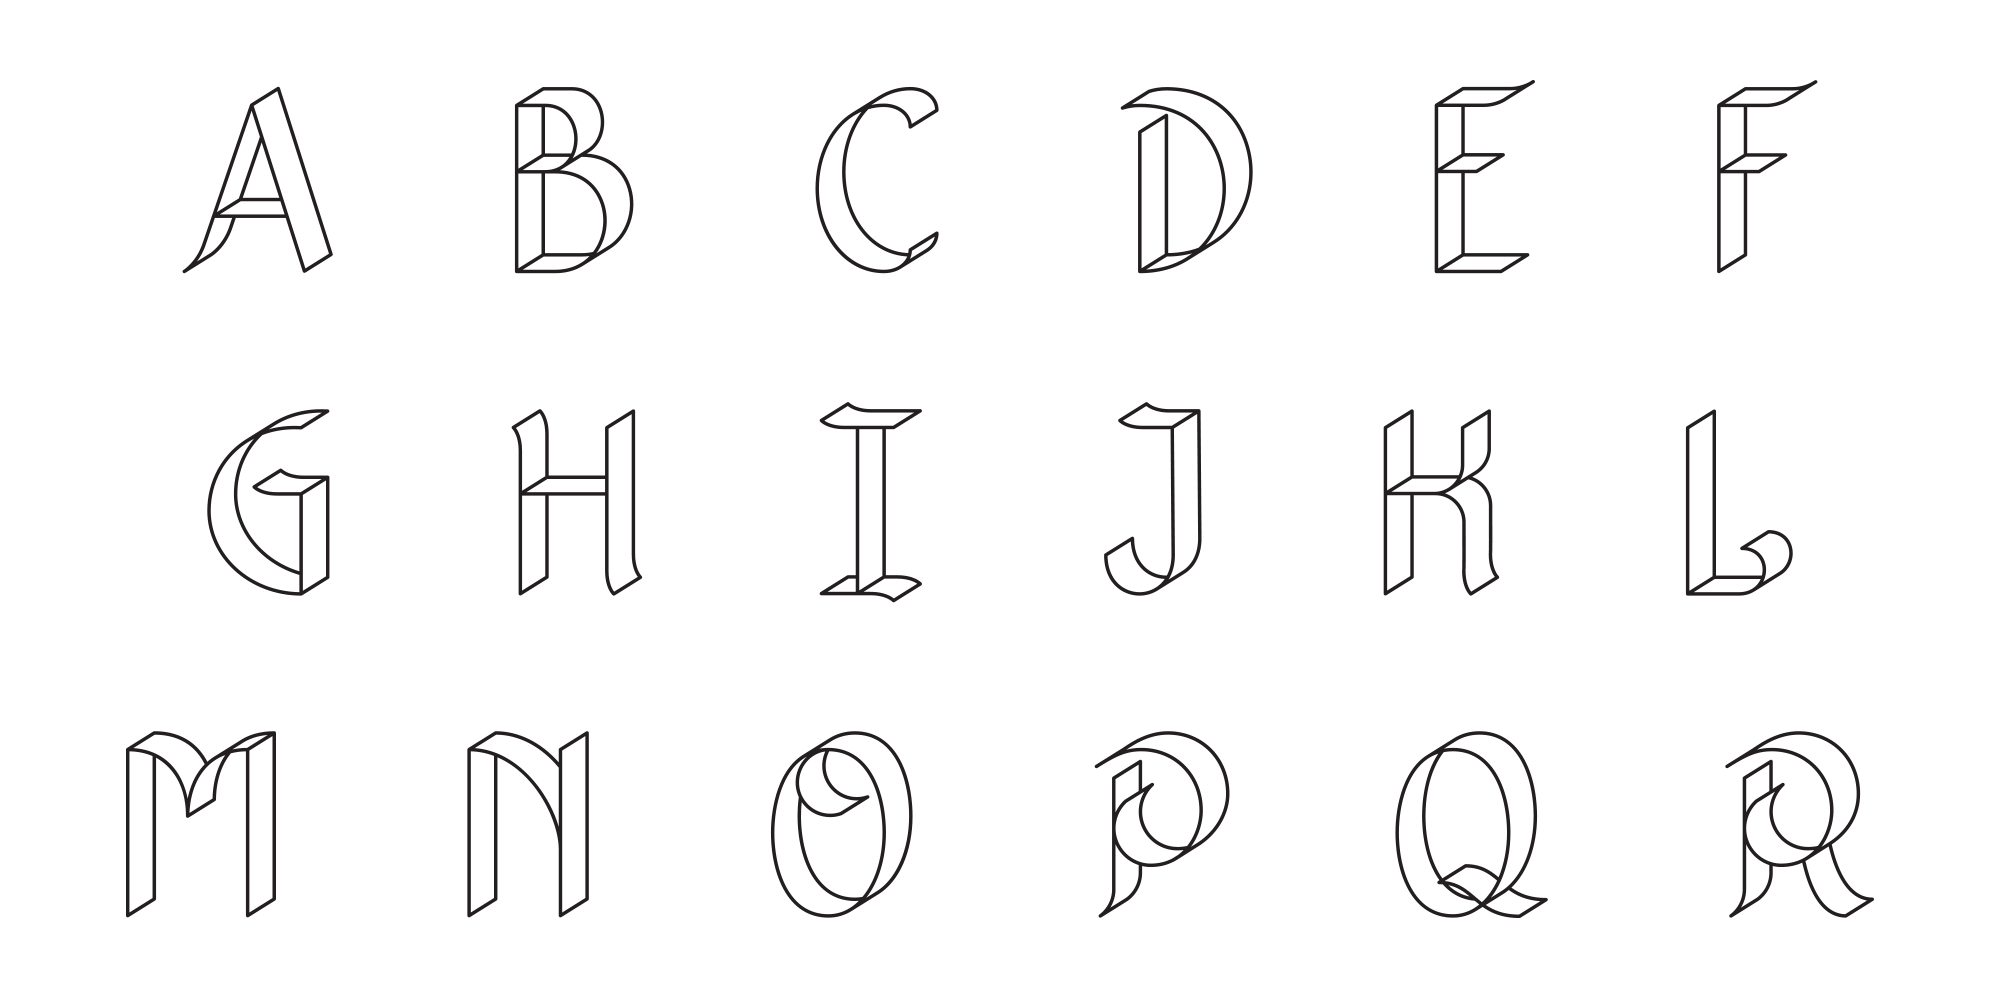 ADC_typeface1.png